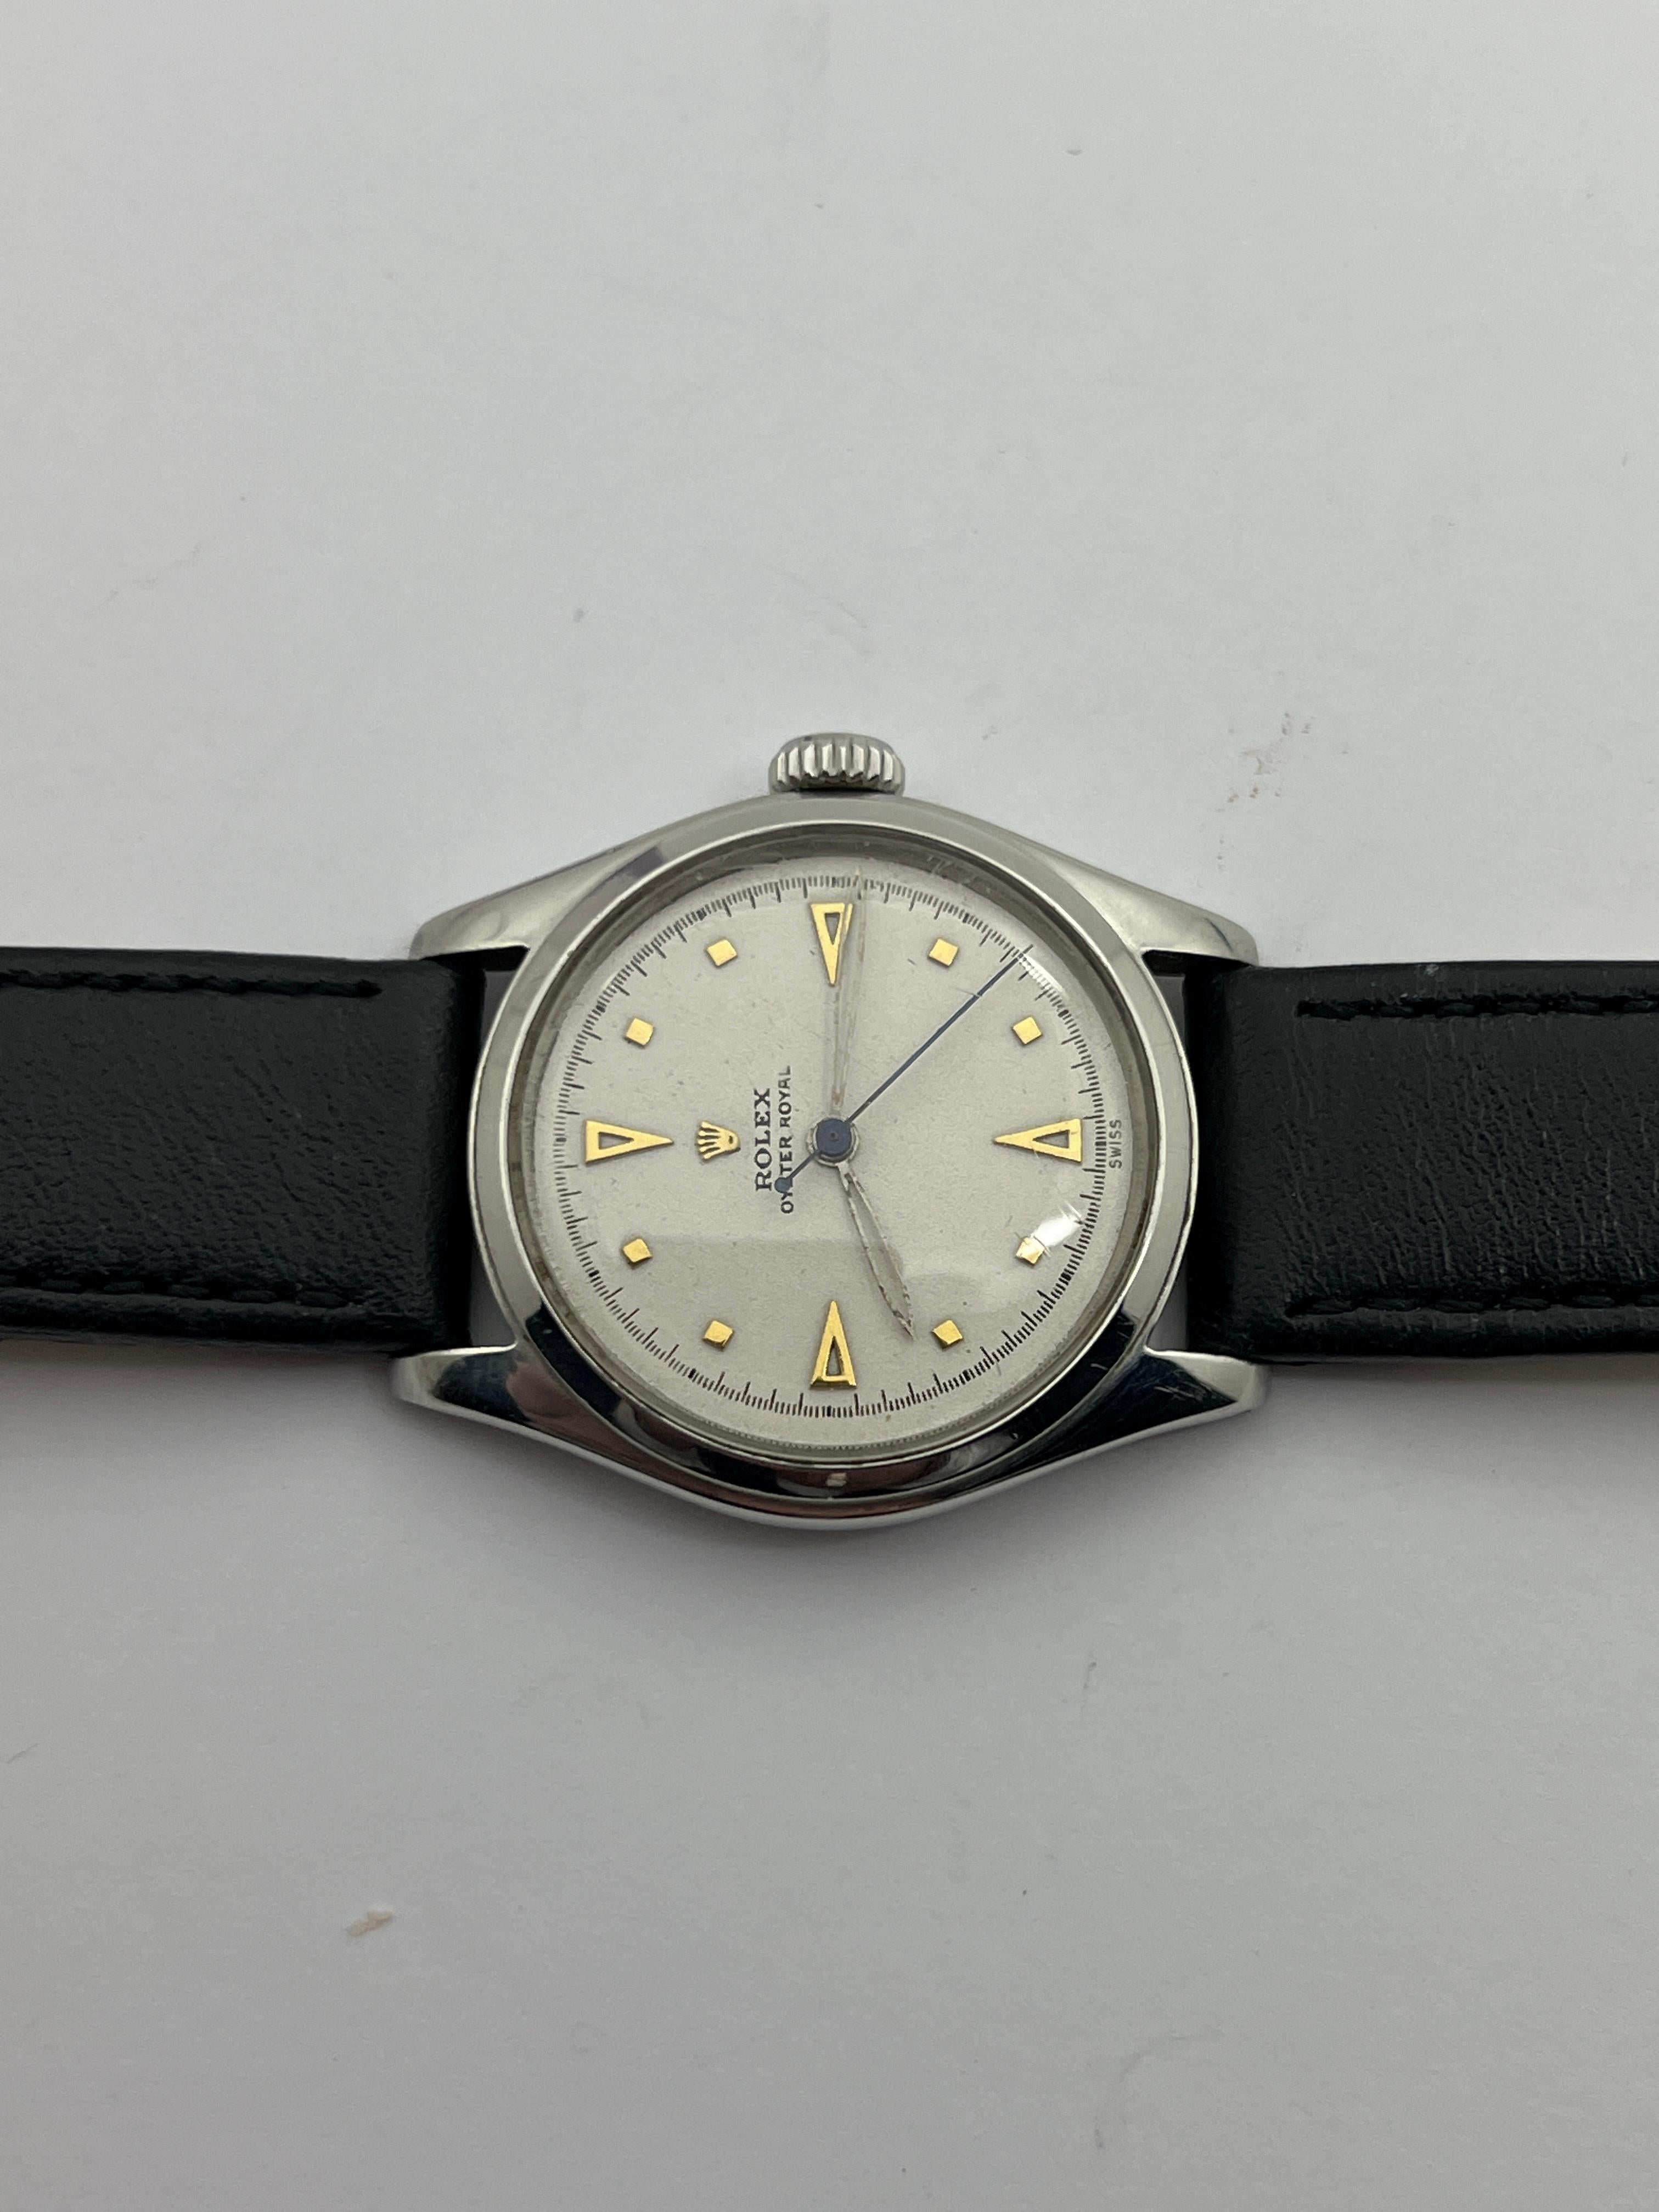 Today's offering showcases this uncommon and original Rolex Oyster Royal model #6144 encased in stainless steel. Built only in the early 1950's, these watches are fine and desirable.

A Style Note:

The Rolex Oyster Royal was introduced in 1933 and